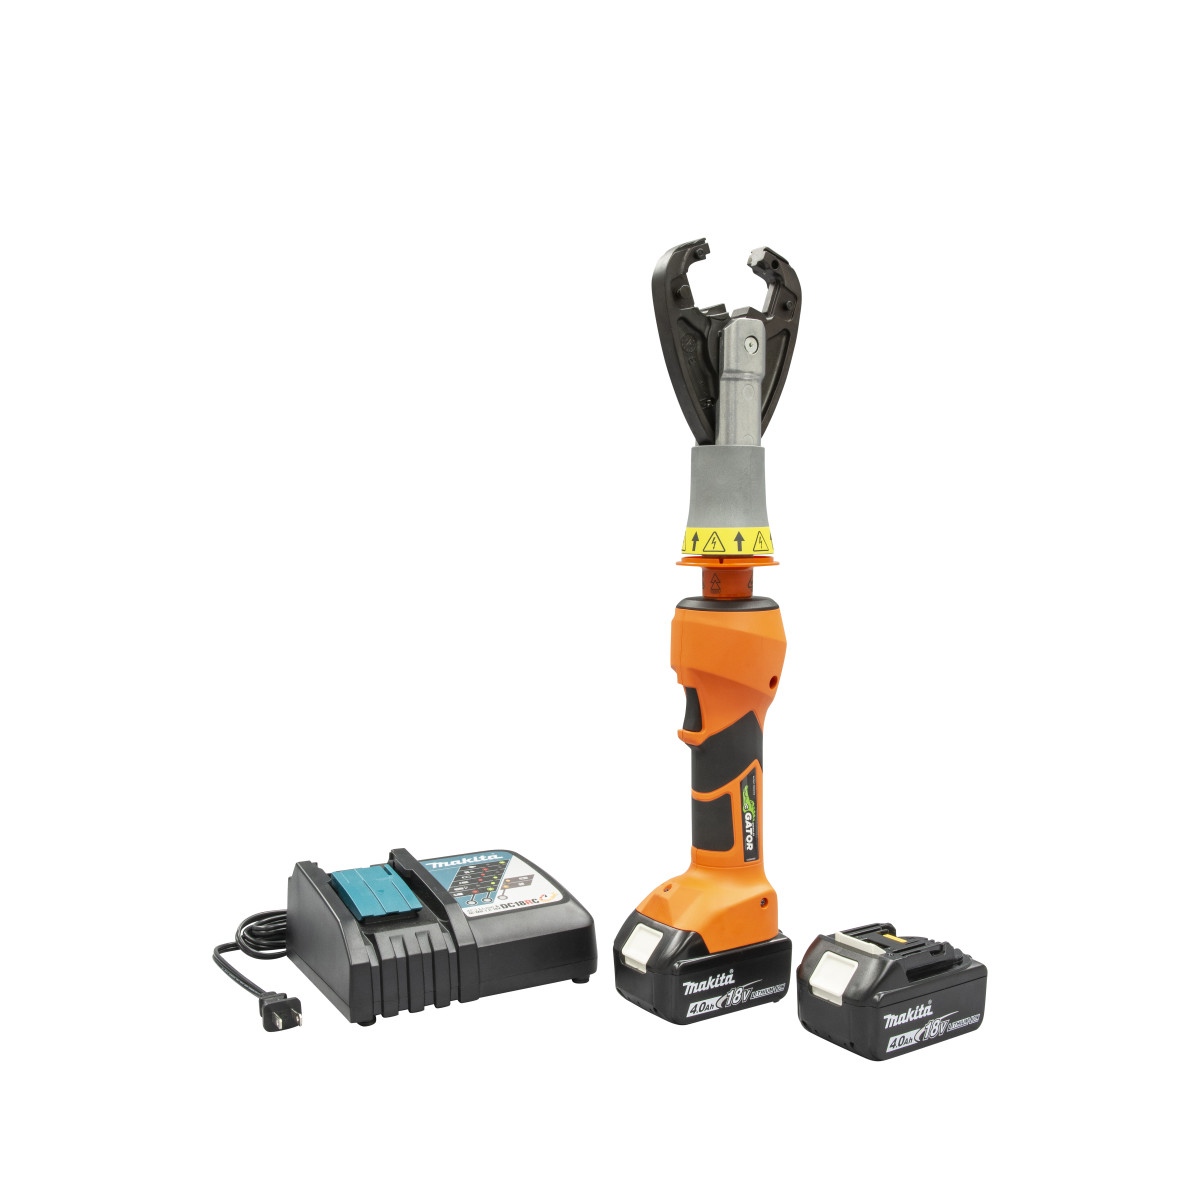 6 Ton Insulated Crimper with CJK Head and 120V Charger. 1000v Insulation. Brush guarded head - helps avoid accidental contact with conductors. Tri-insulation barrier - Provides three (3) layers of protection (Patent Pending). 360° Rotating head  - For improved agility in confined work spaces. Double -tap safety feature option -Prevents unintentional operation. Bluetooth® communication